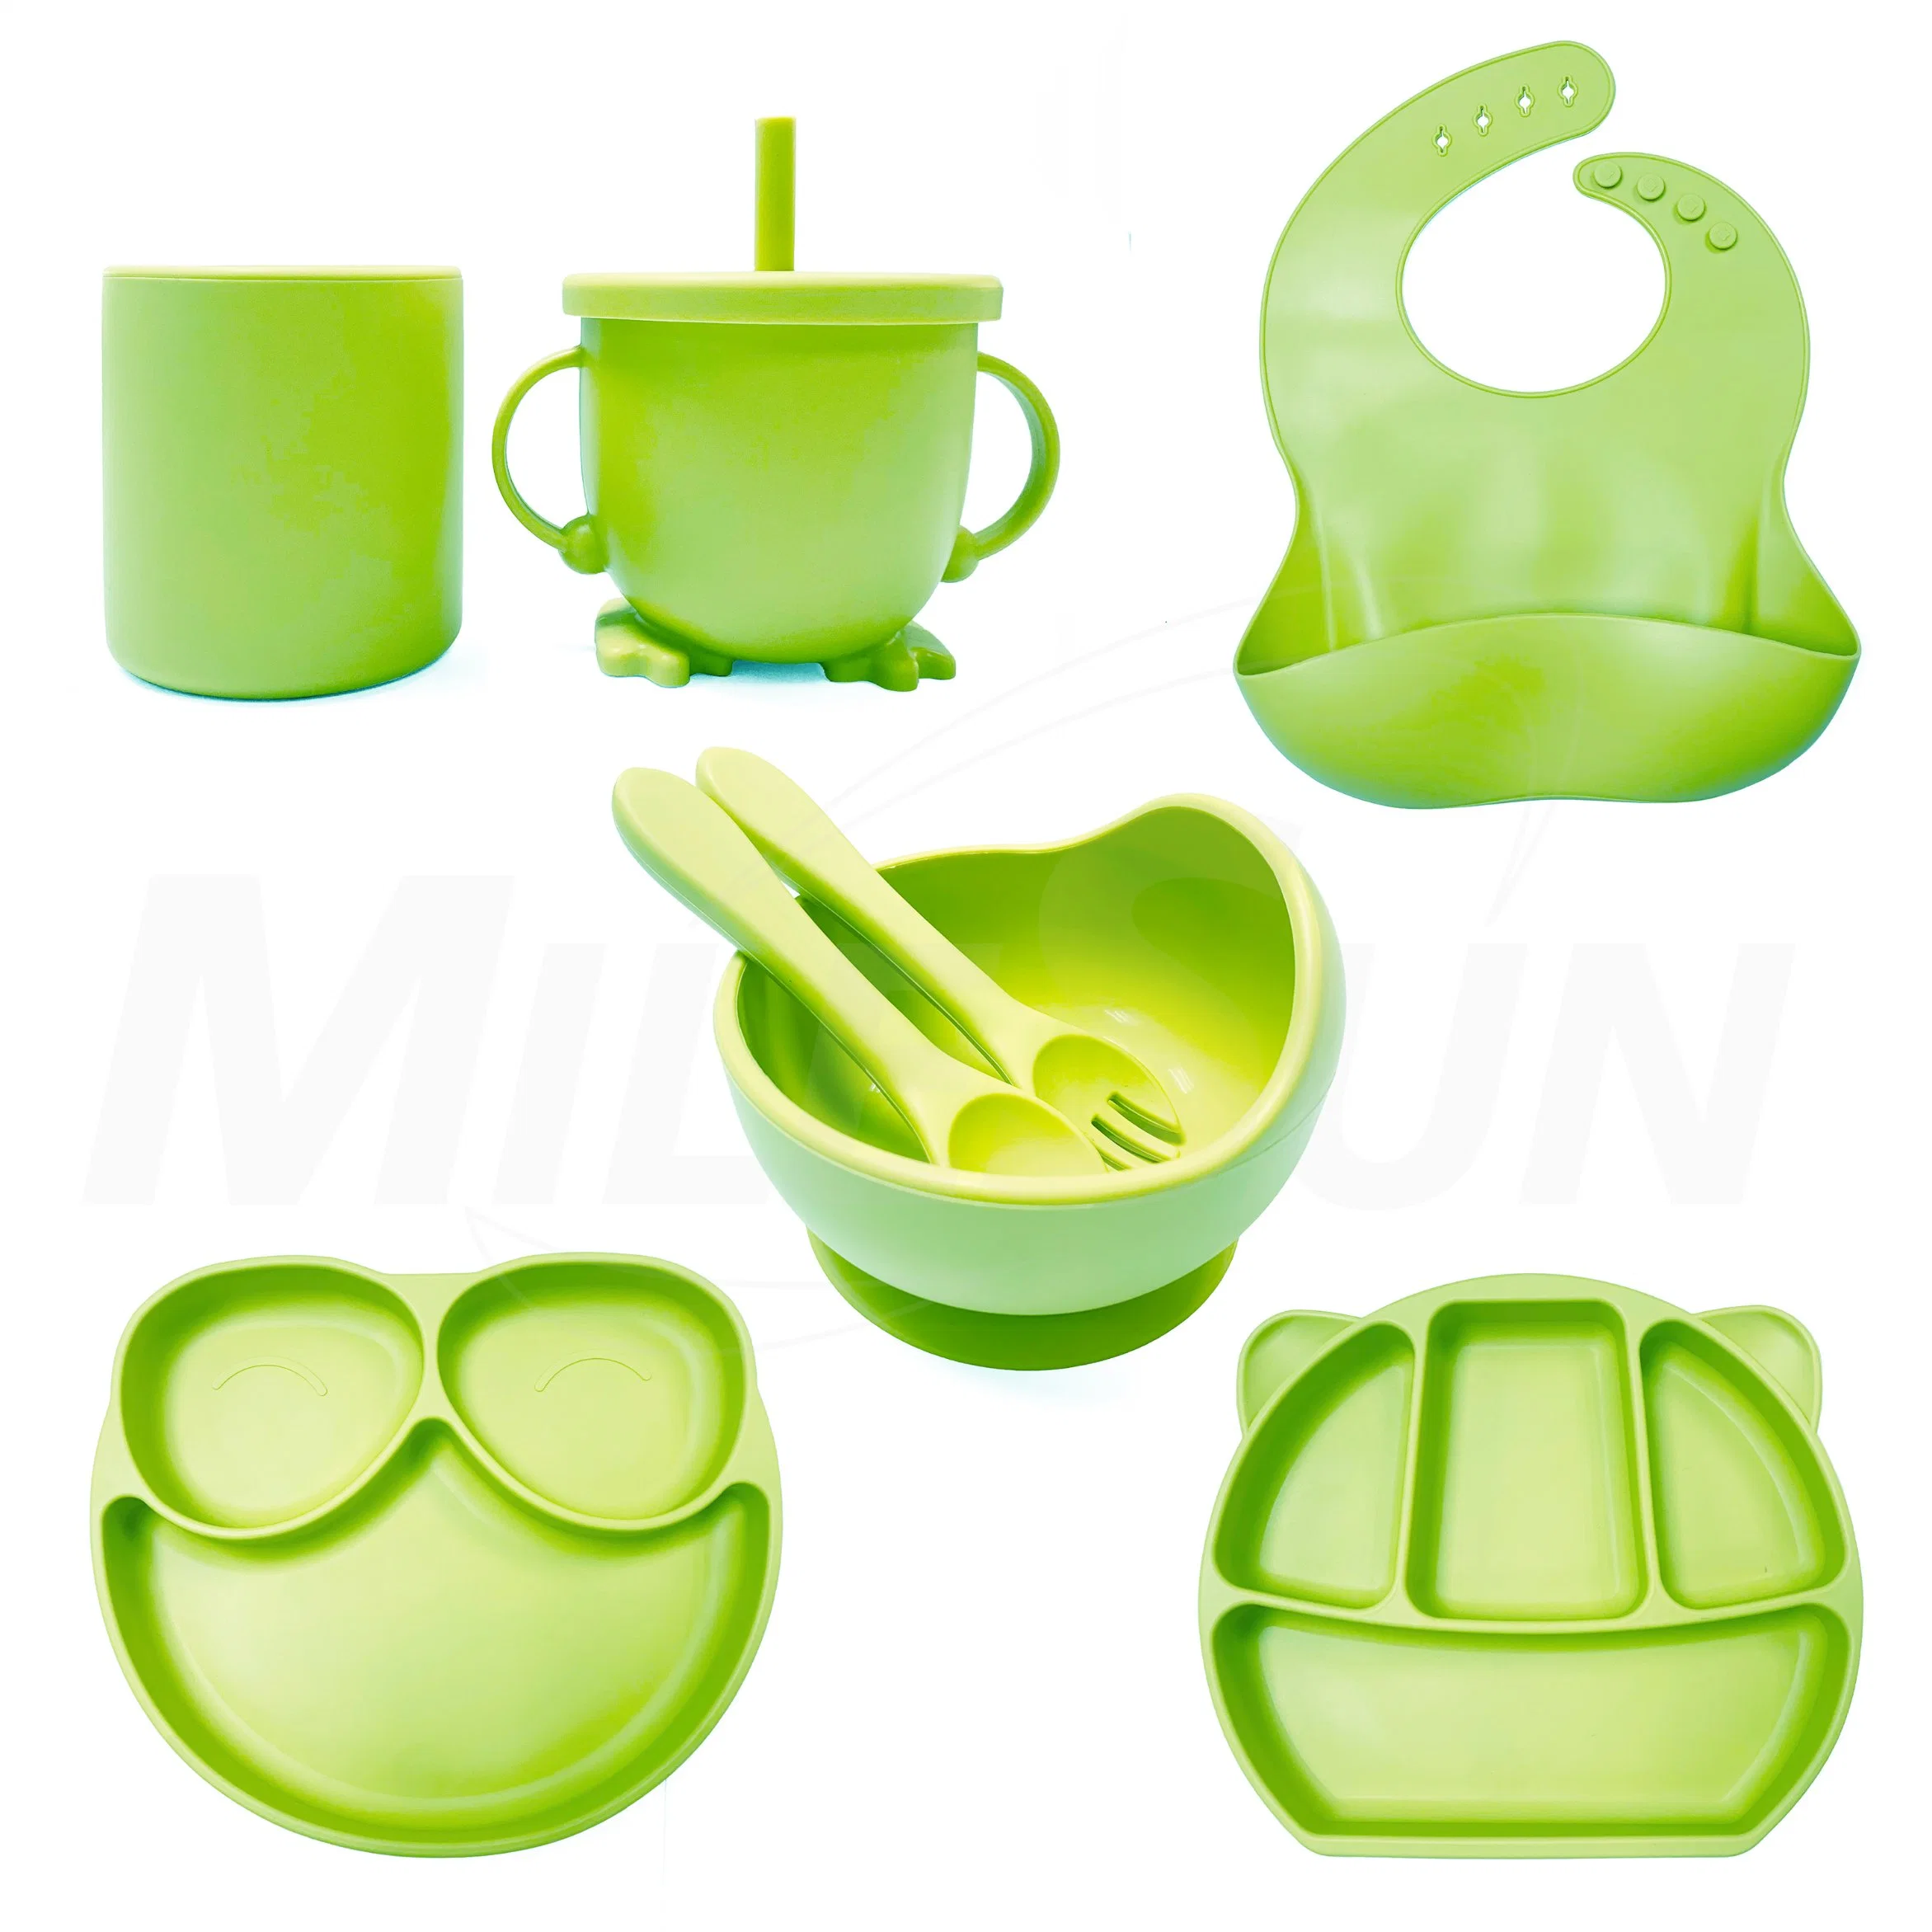 Milesun&prime; S Complete Baby Feeding Set with Baby Plate, Baby Spoons, Silicone Bib and Snack Cup - Infant Eating Utensils and Baby Bowl with Suction